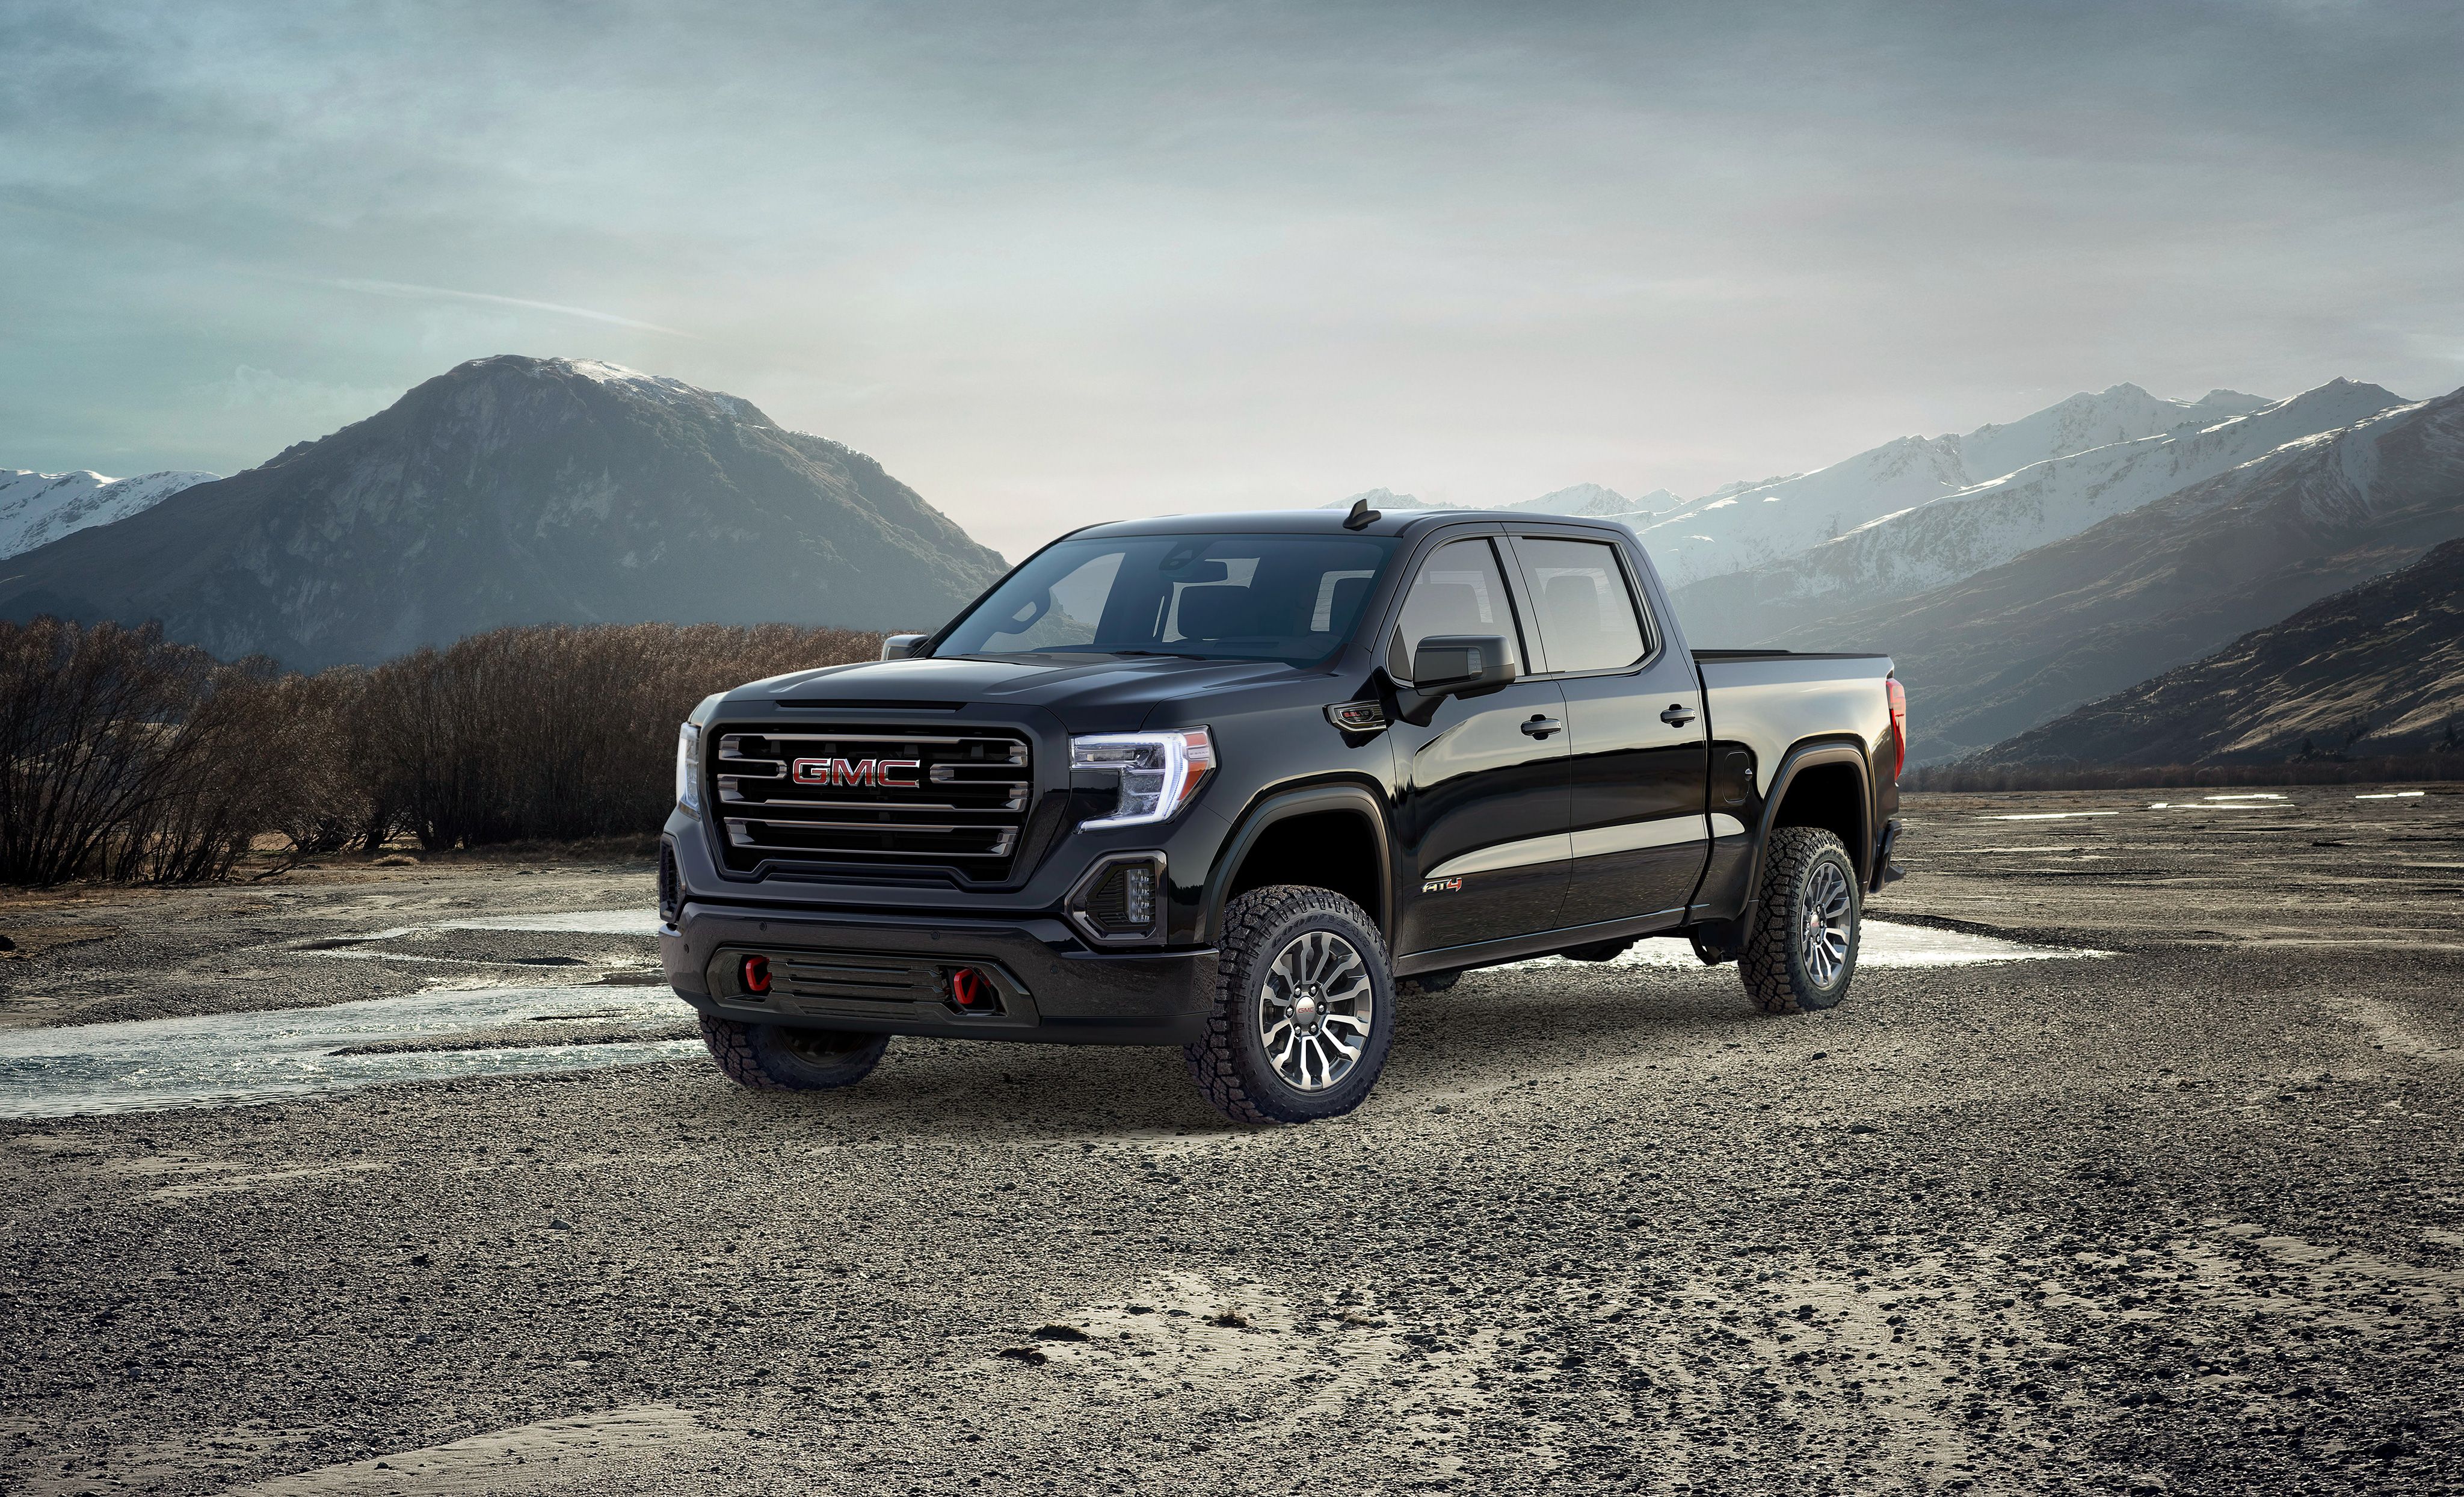 GMC Sierra AT HD Cars, 4k Wallpaper, Image, Background, Photo and Picture